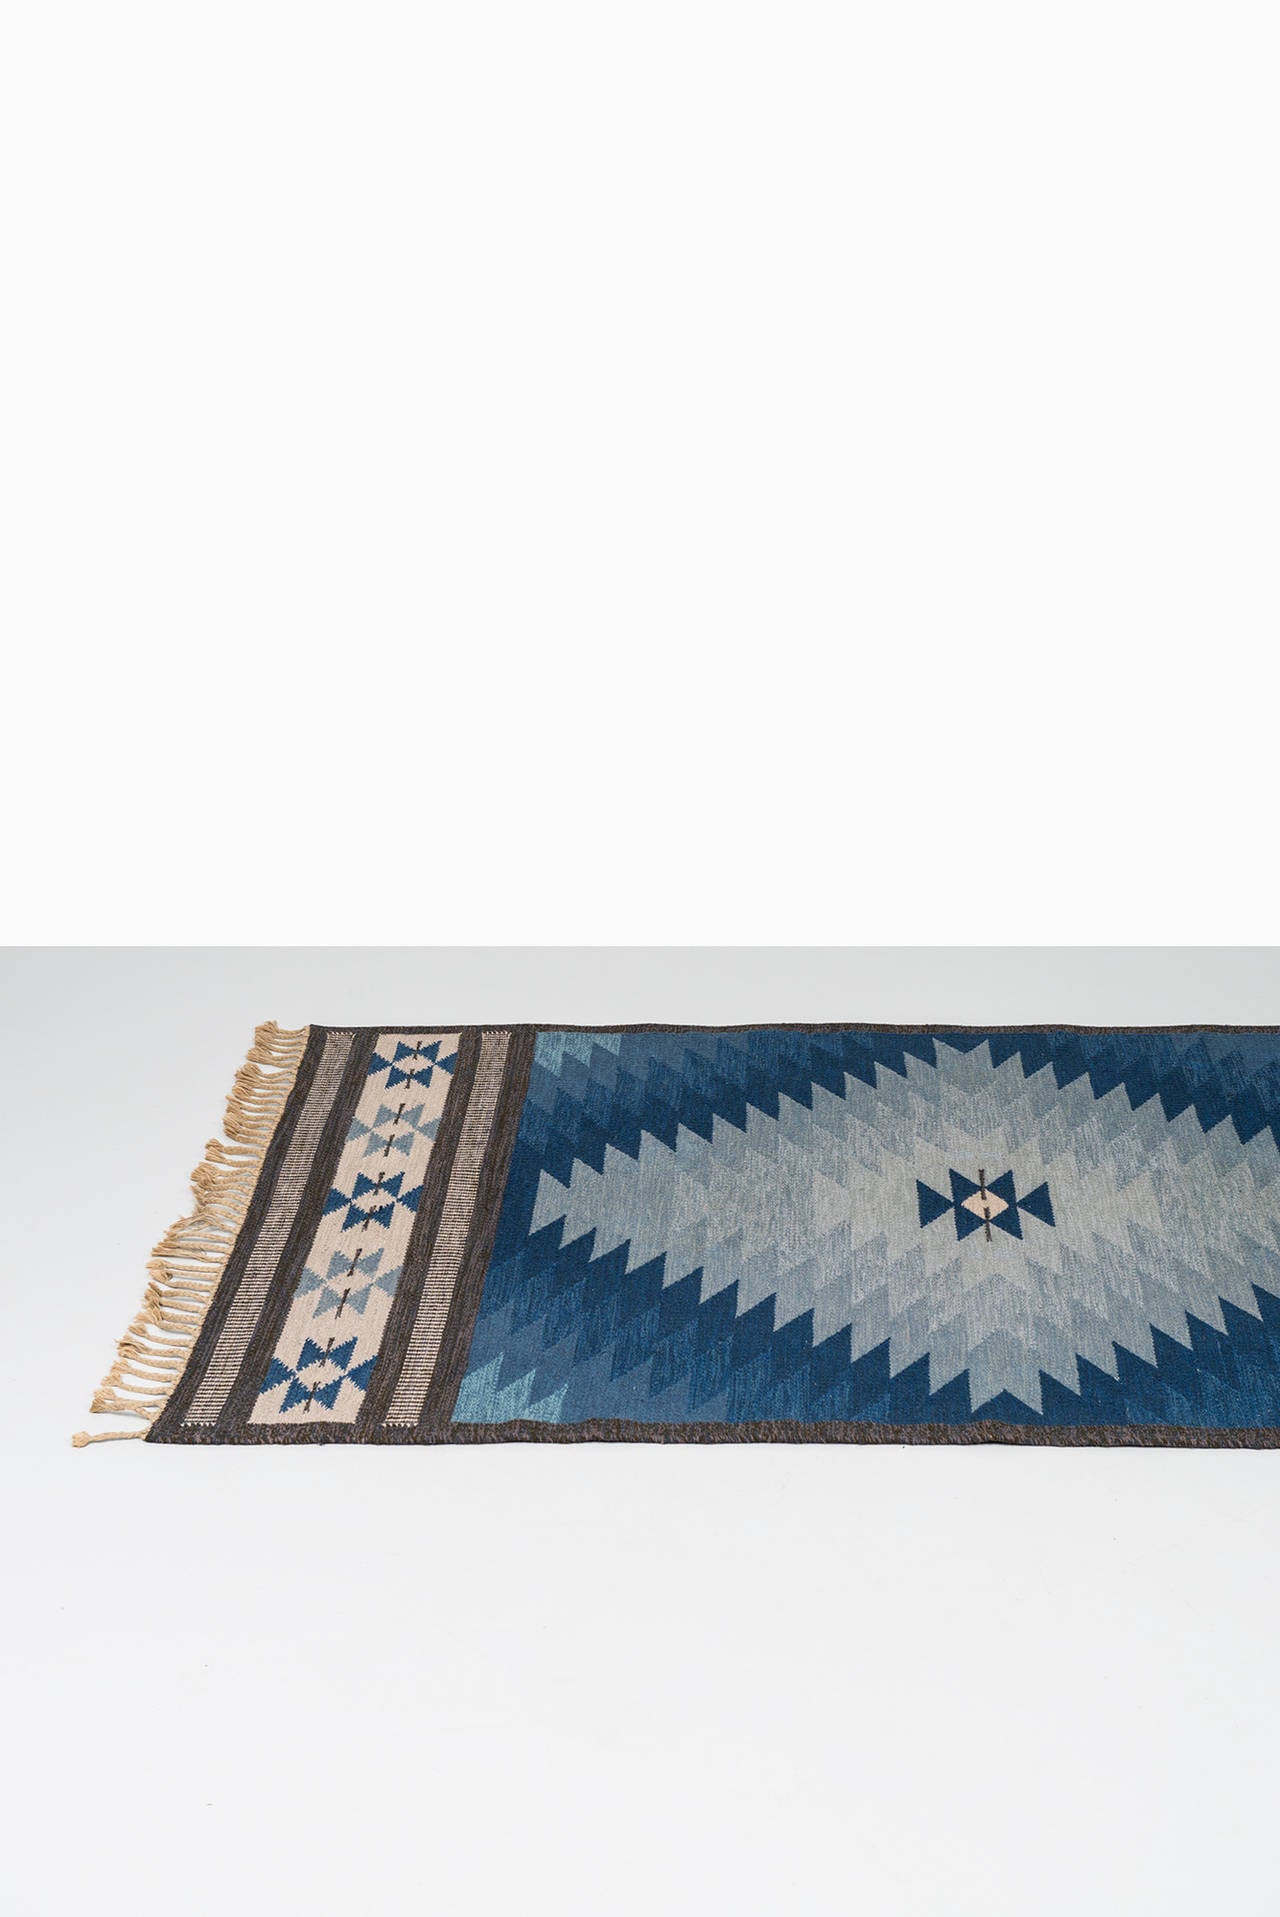 Rare Röllakan carpet by unknown designer with initials GL (?), produced in Sweden.